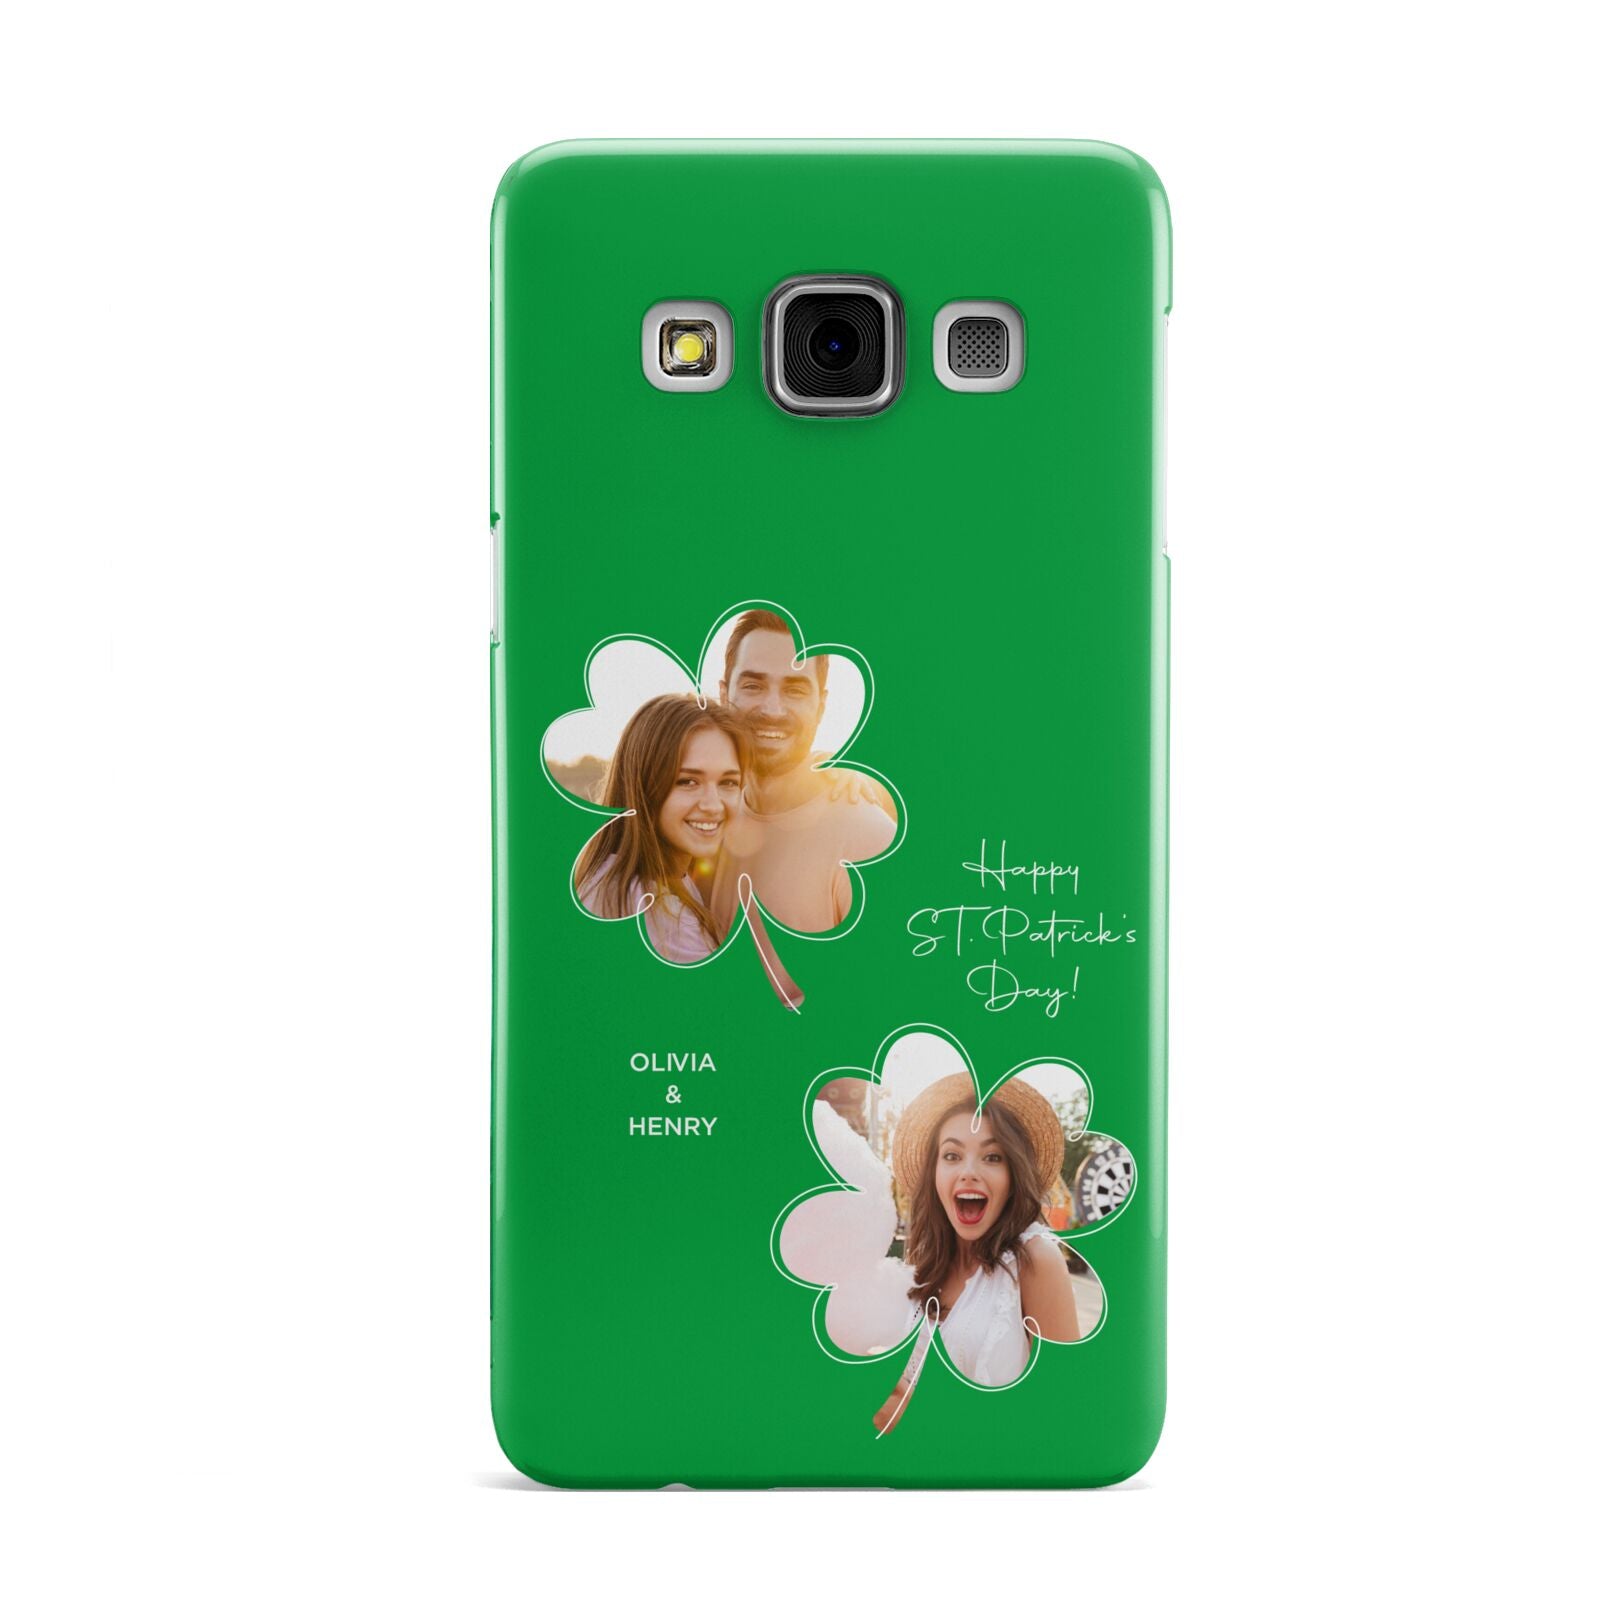 Personalised Photo St Patricks Day Samsung Galaxy A3 Case